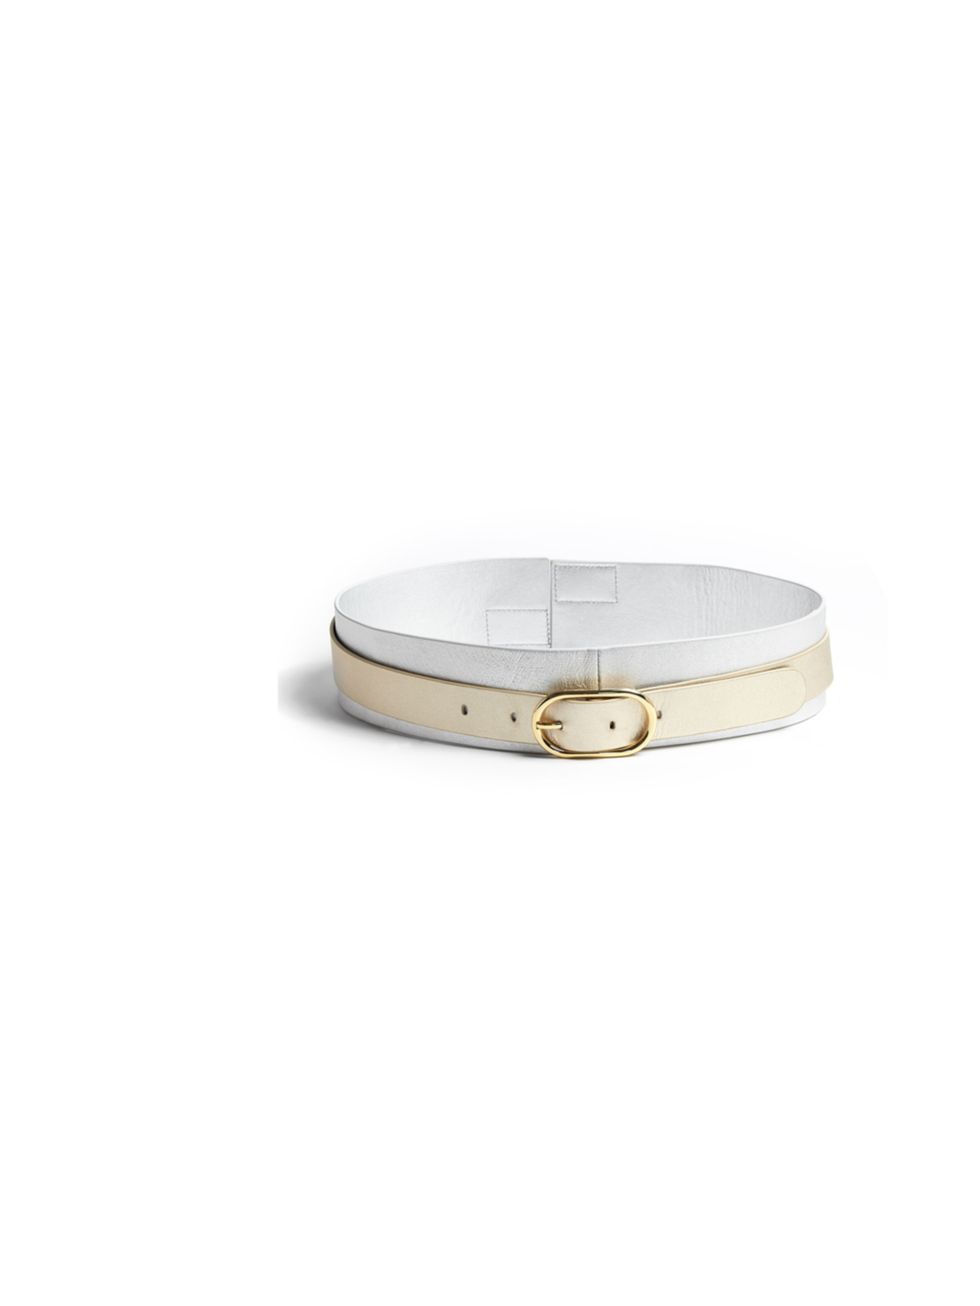 <p>Chic French label Raoul has just landed at My-Wardrobe, which is a very good place to scour the new season pieces... Raoul metallic leather belt, £104, at My-Wardrobe</p><p><a href="http://shopping.elleuk.com/browse?fts=raoul+belt">BUY NOW</a></p>